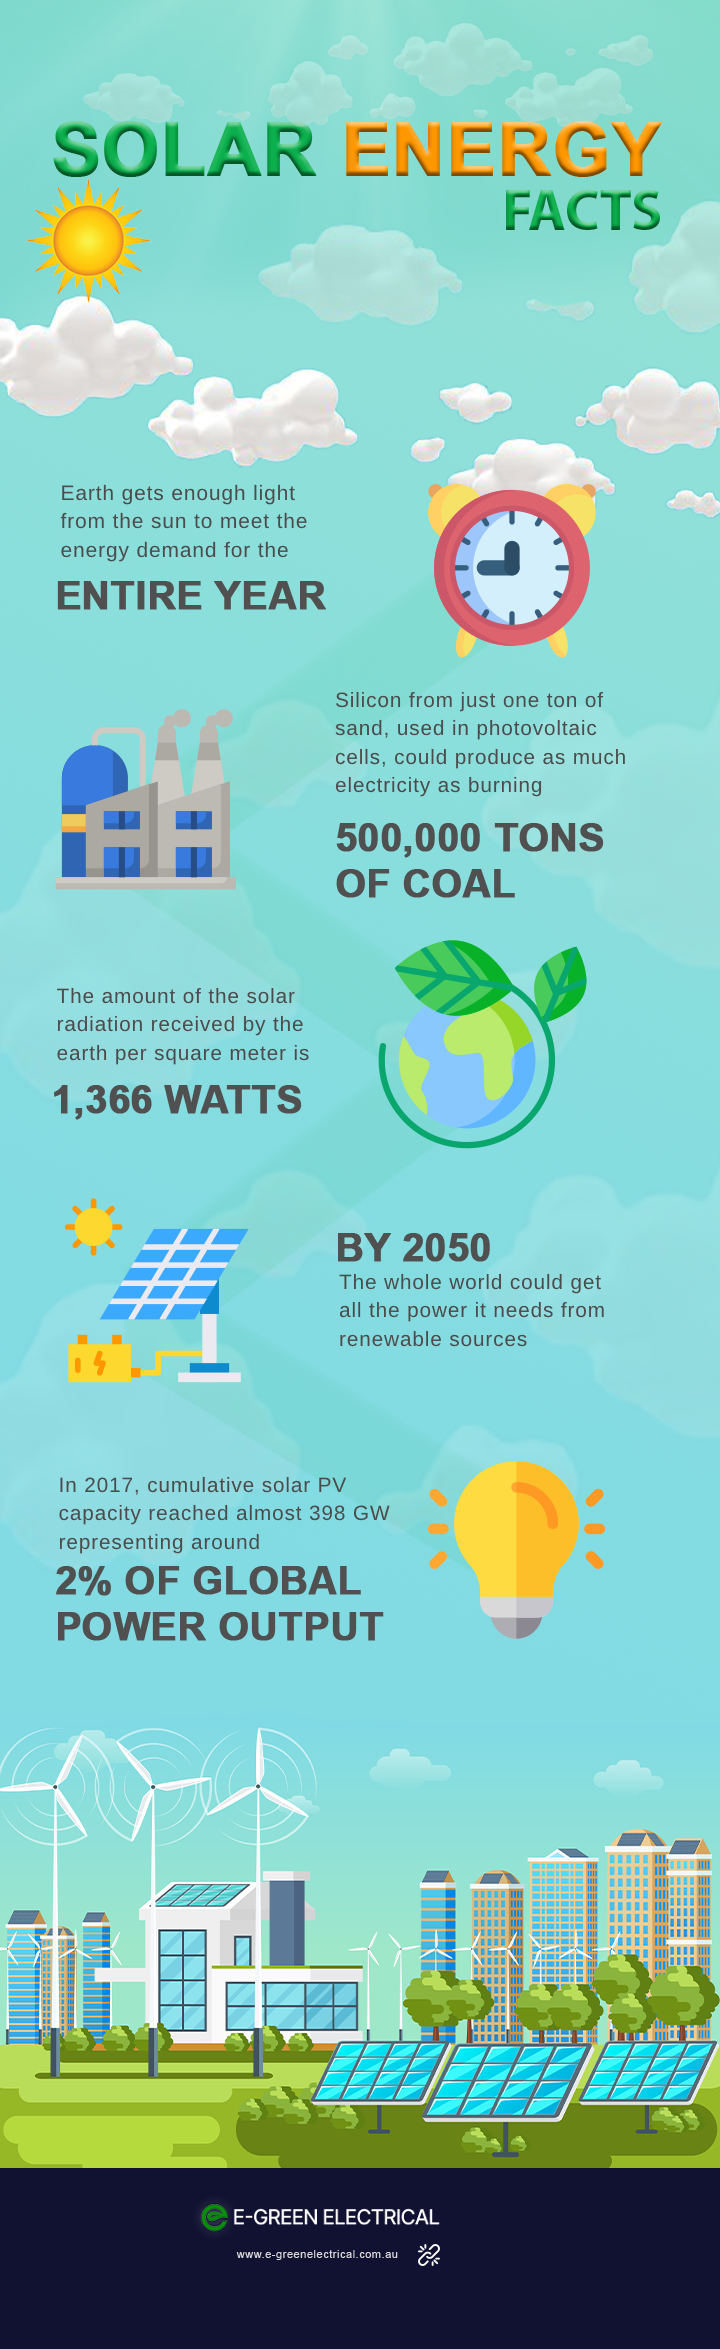 facts about solar energy in infographic